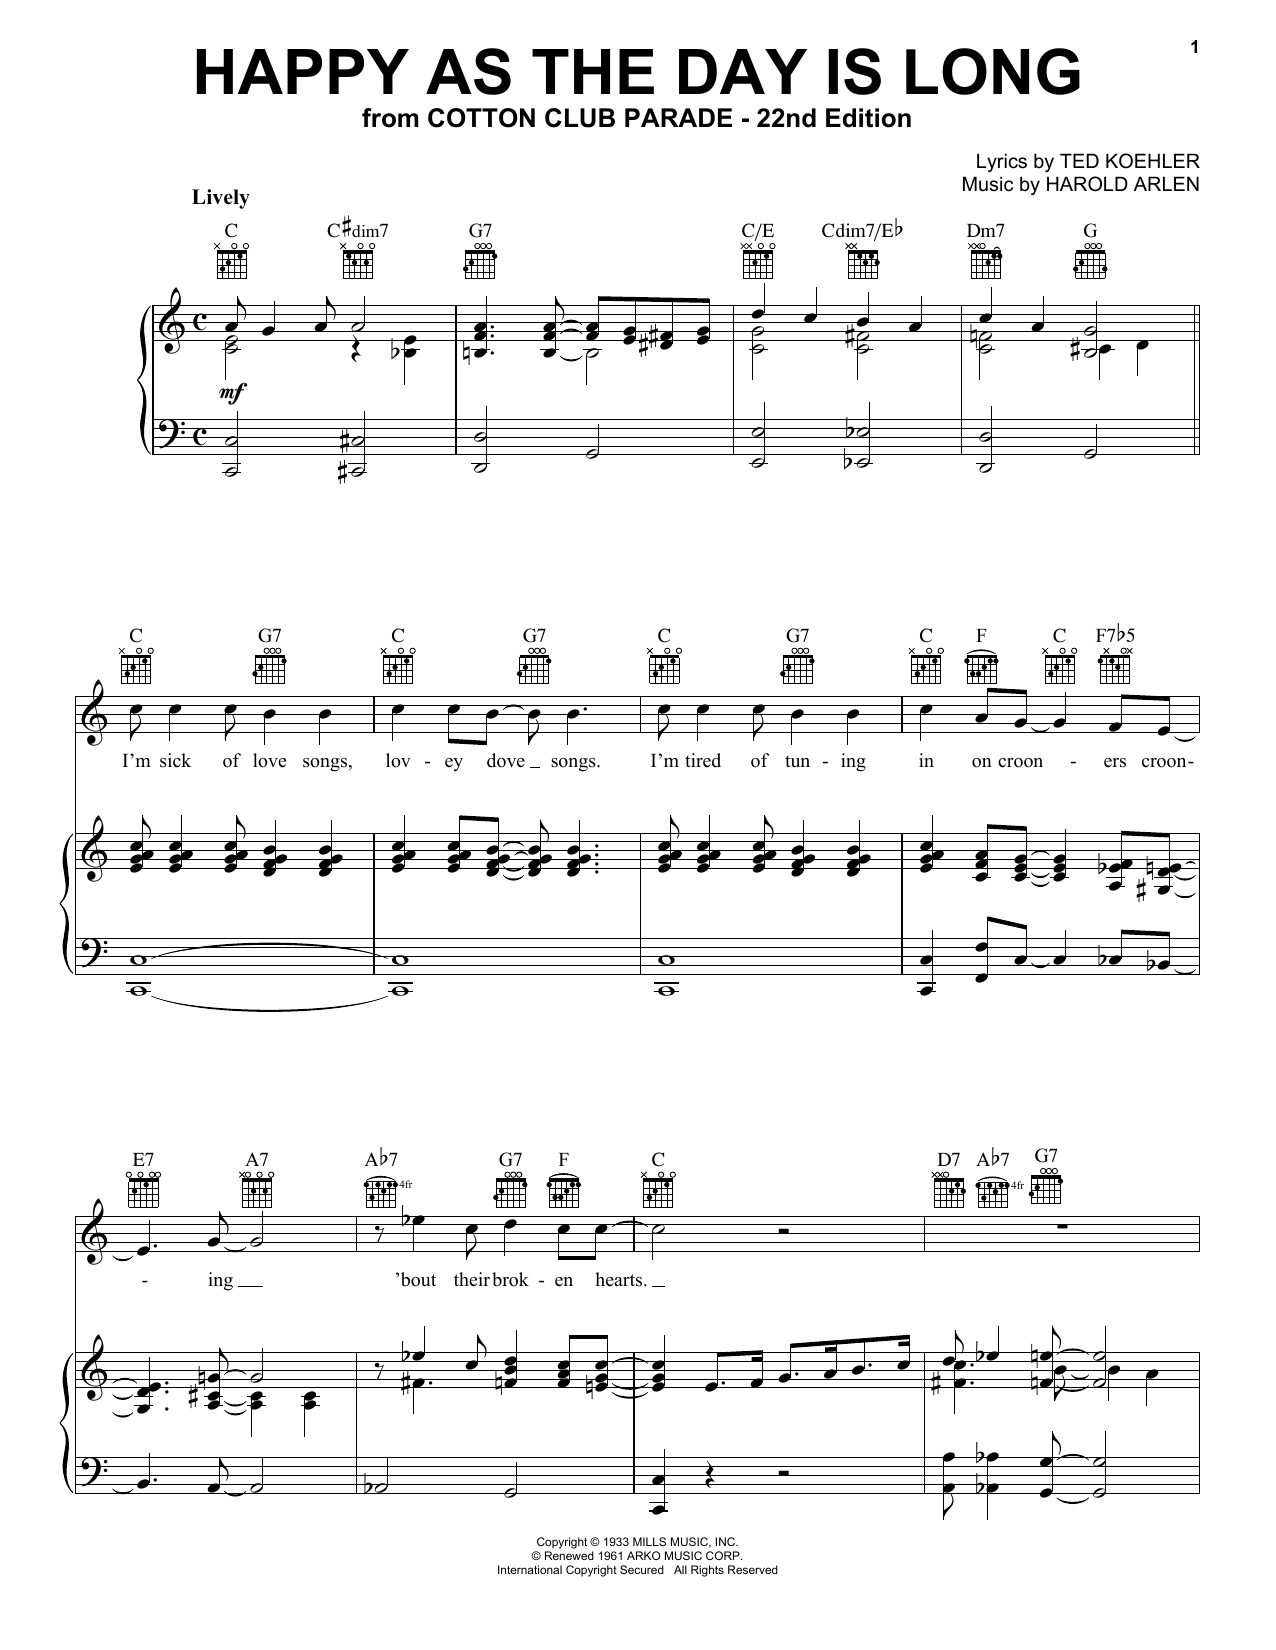 Download Harold Arlen Happy As The Day Is Long Sheet Music